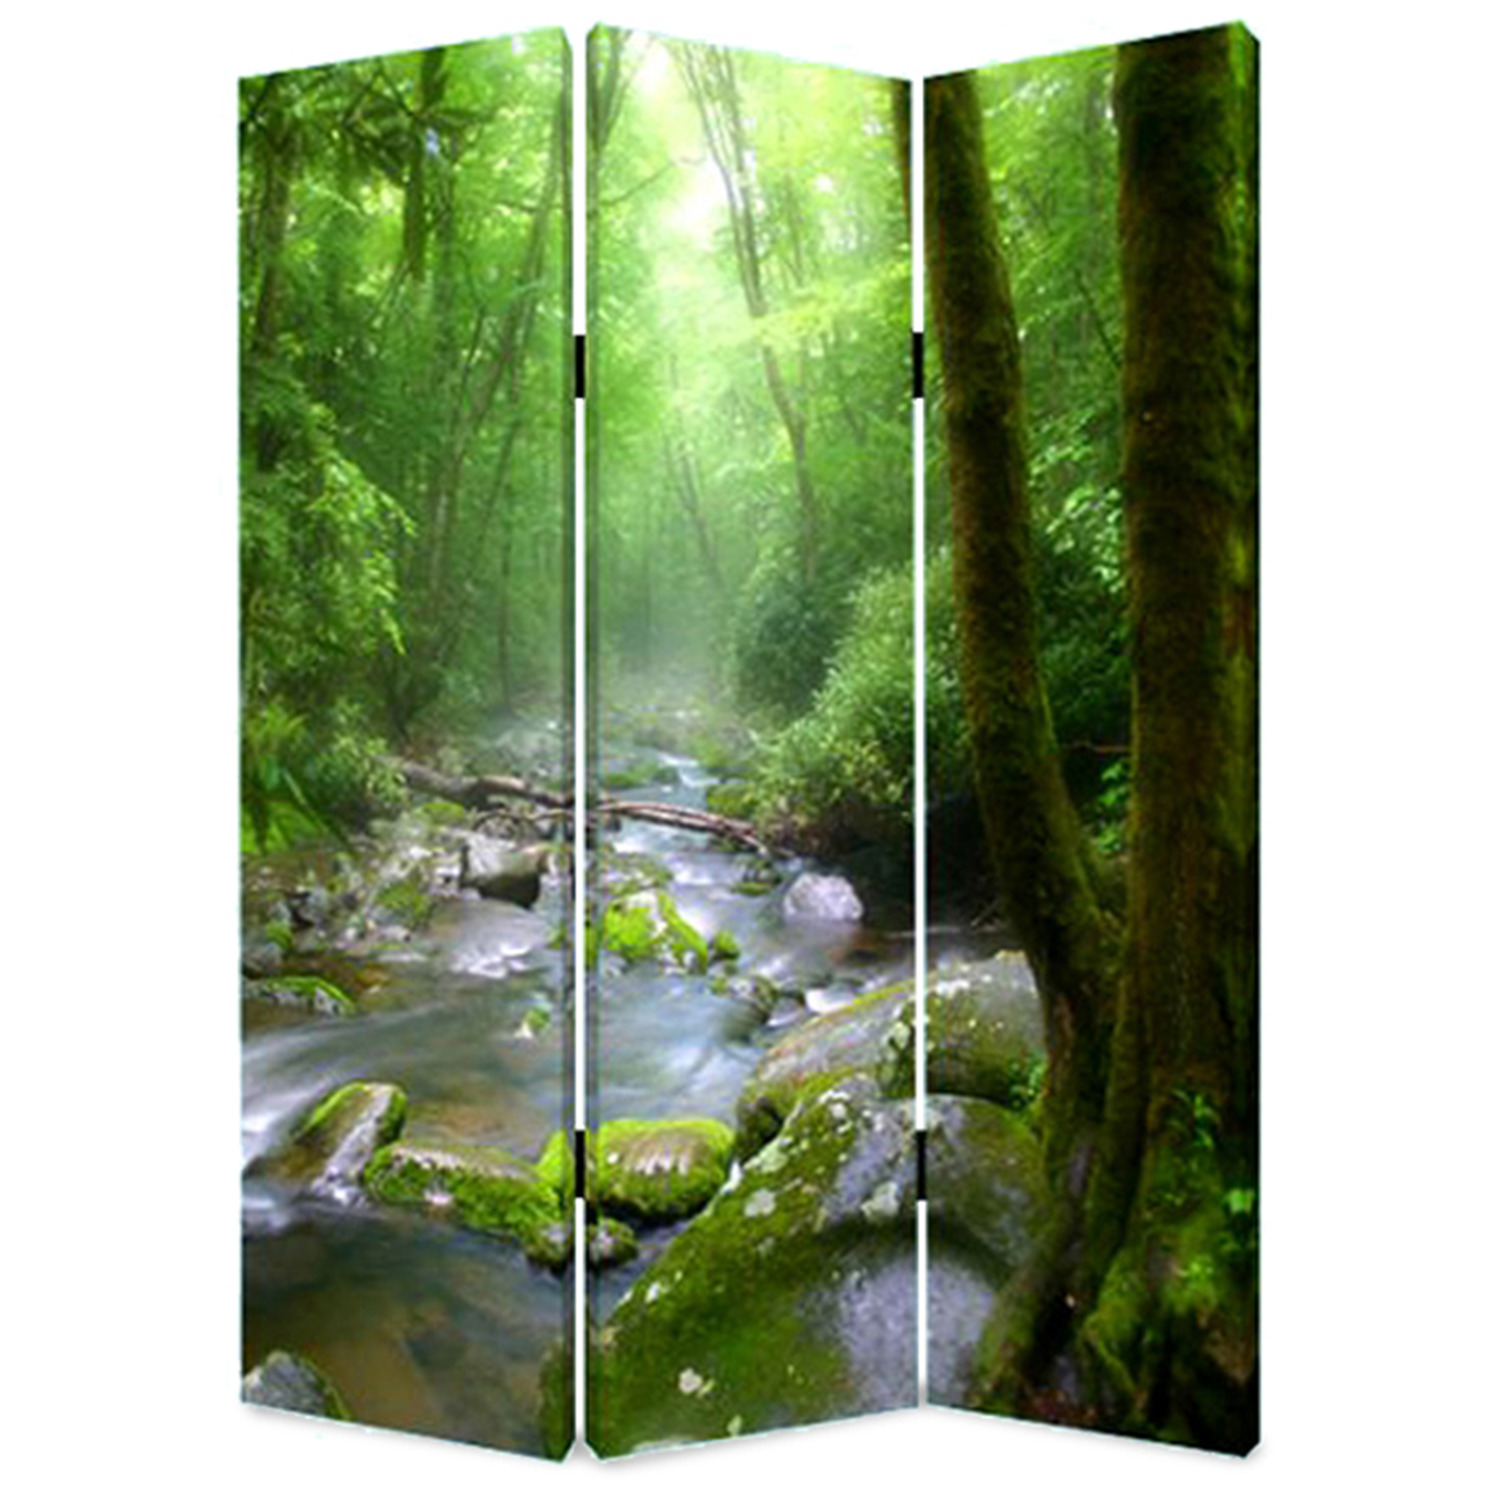 3 Panel Foldable Canvas Screen with Rainforest Print in Green - image 1 of 3